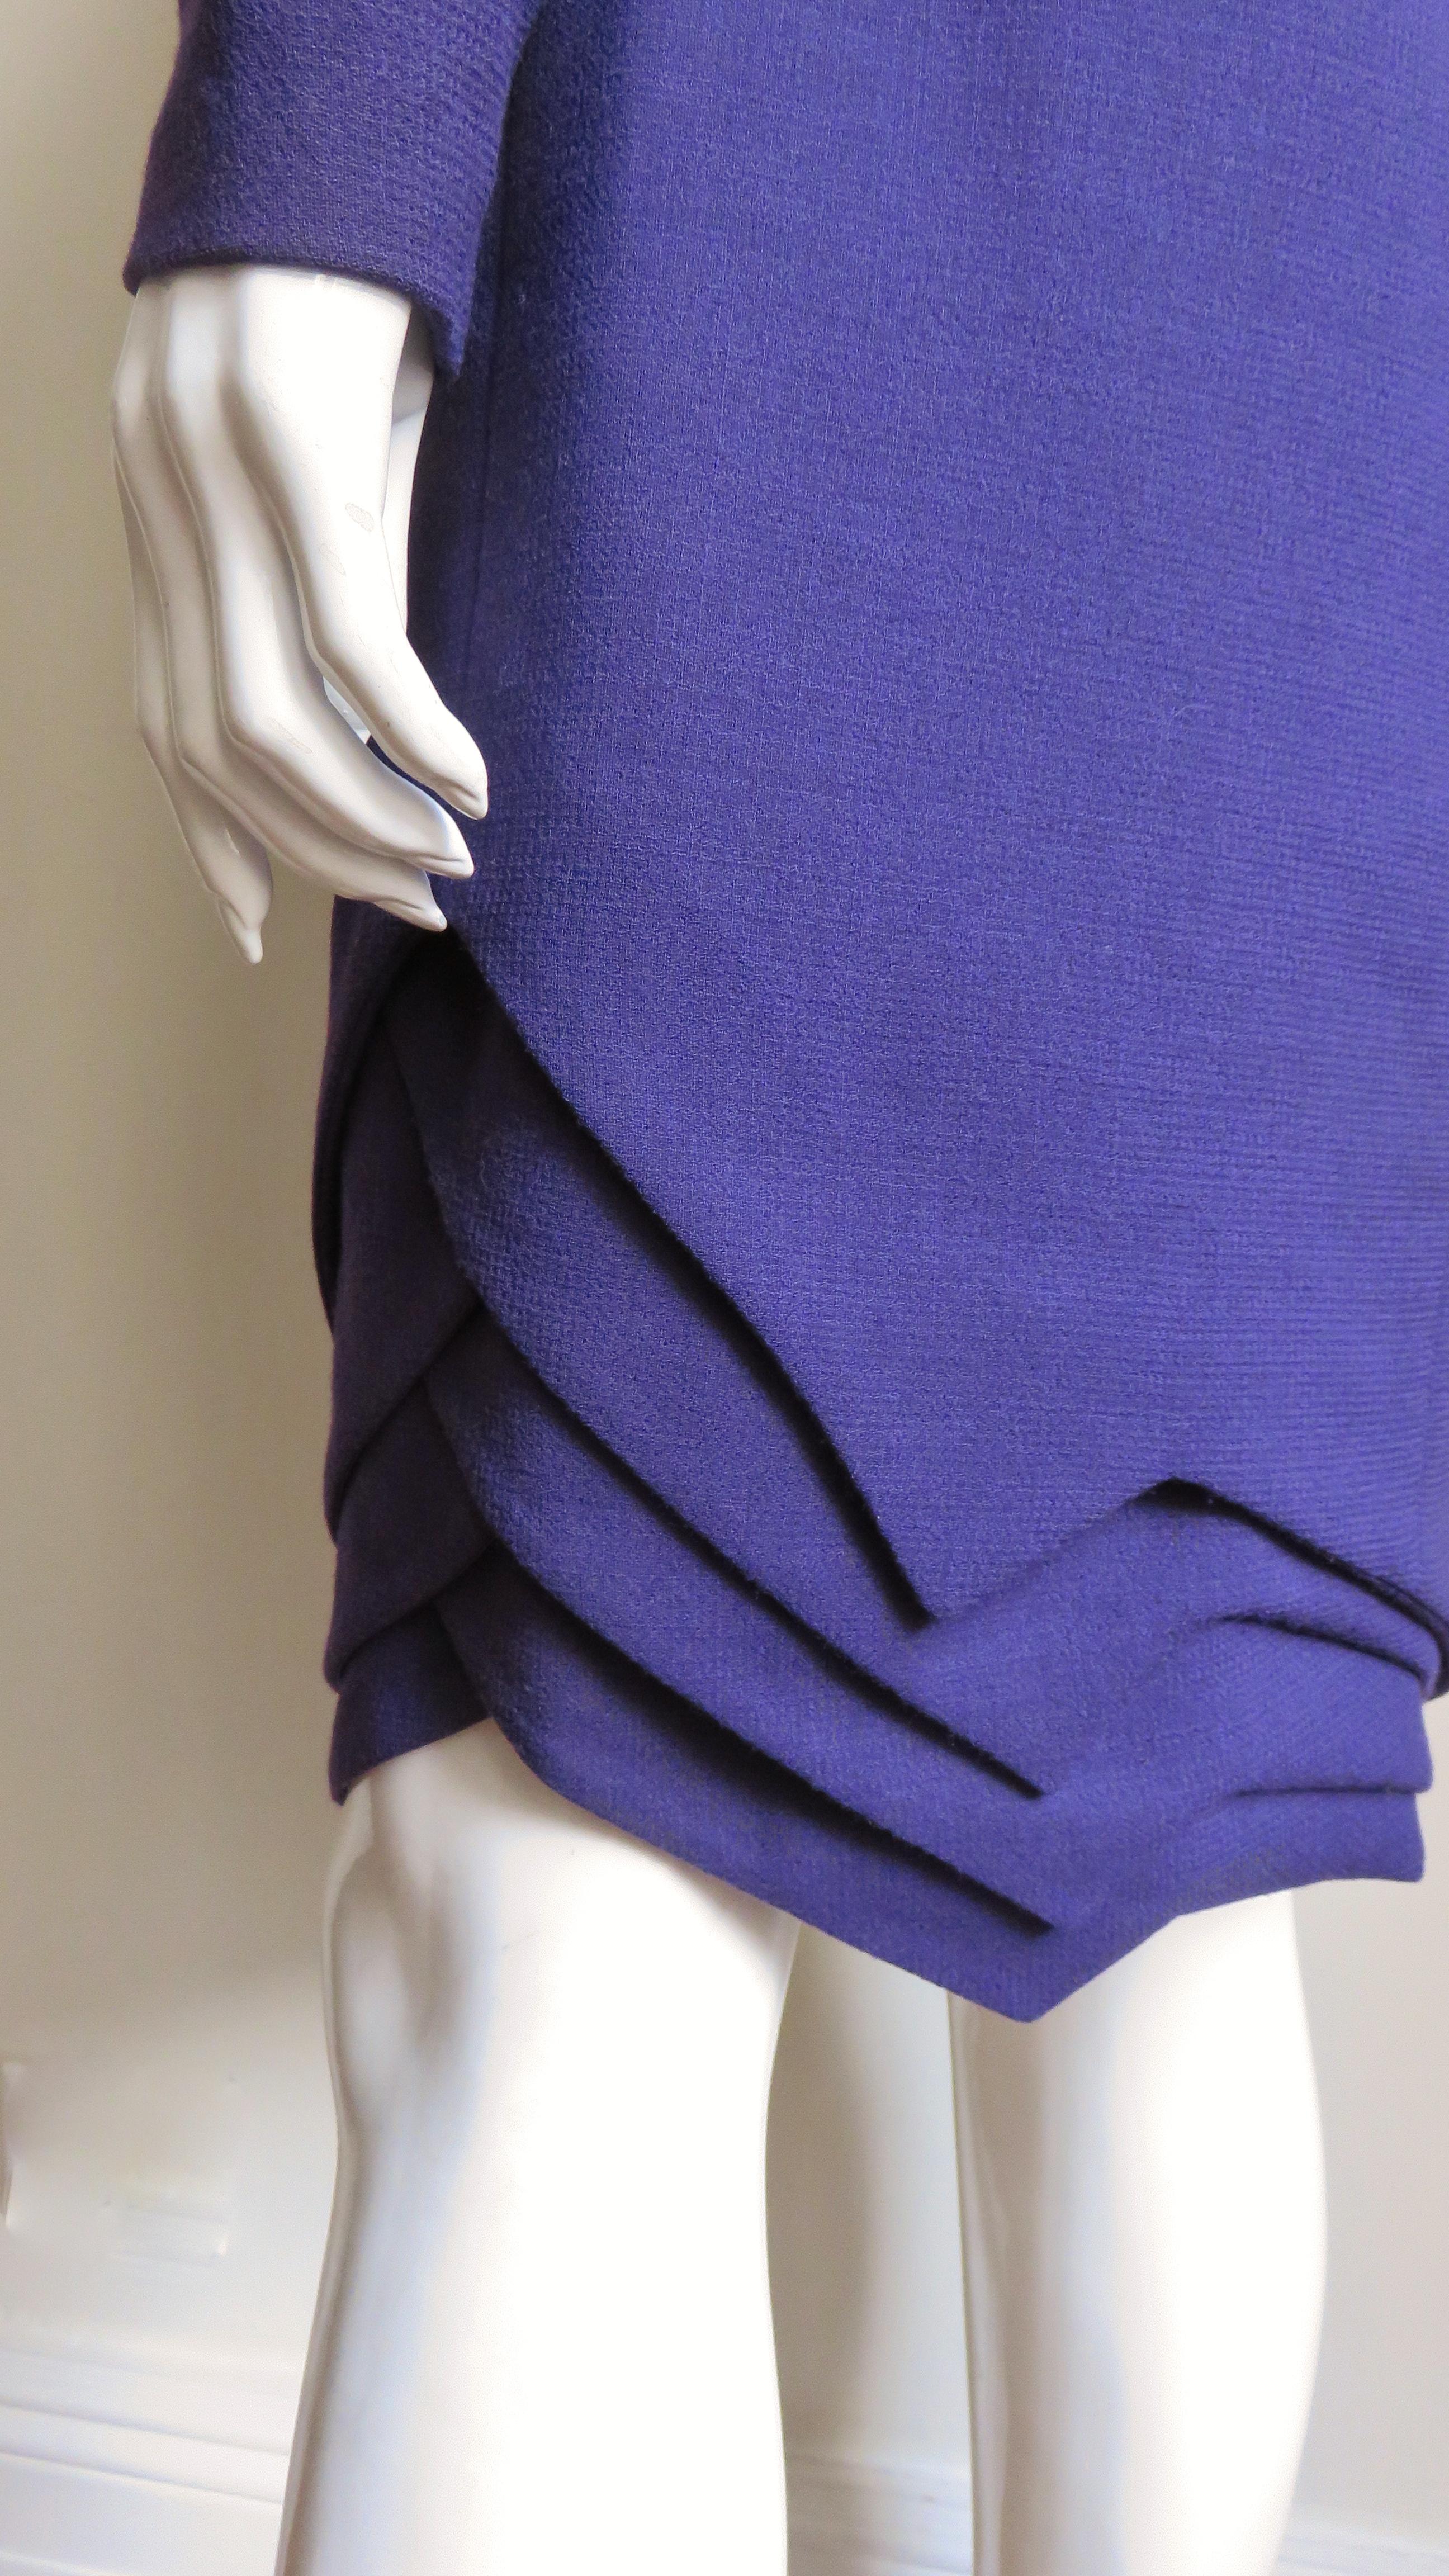 Gianni Versace Purple 1990s Dress with Origami Hem  For Sale 5